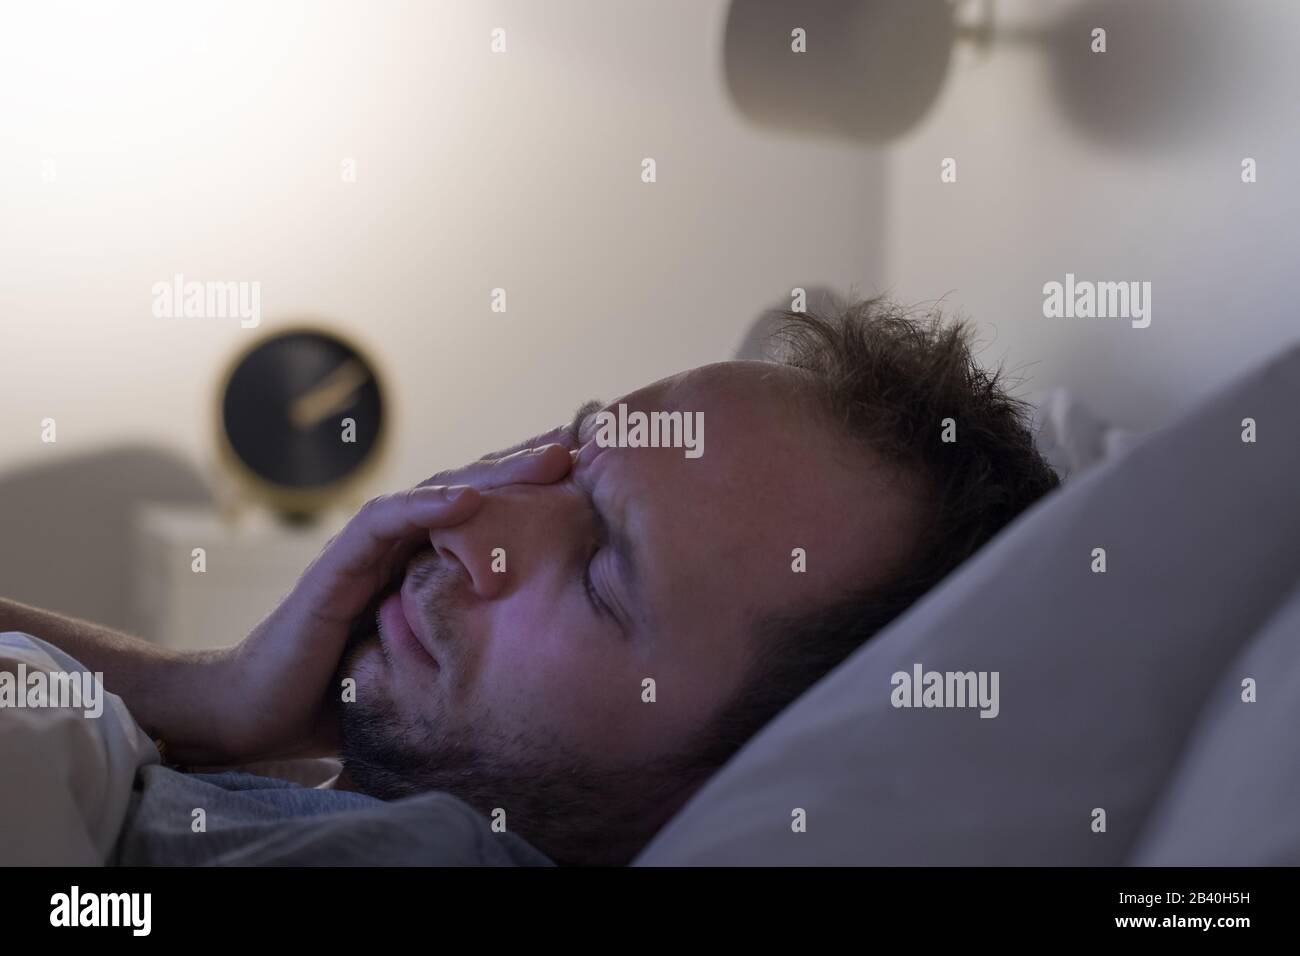 Insomnia, bad dreams concept. Man can't sleep after party, lying on bed at night, alarm clock on bedside table. Sleep/wake cycle disorders Stock Photo